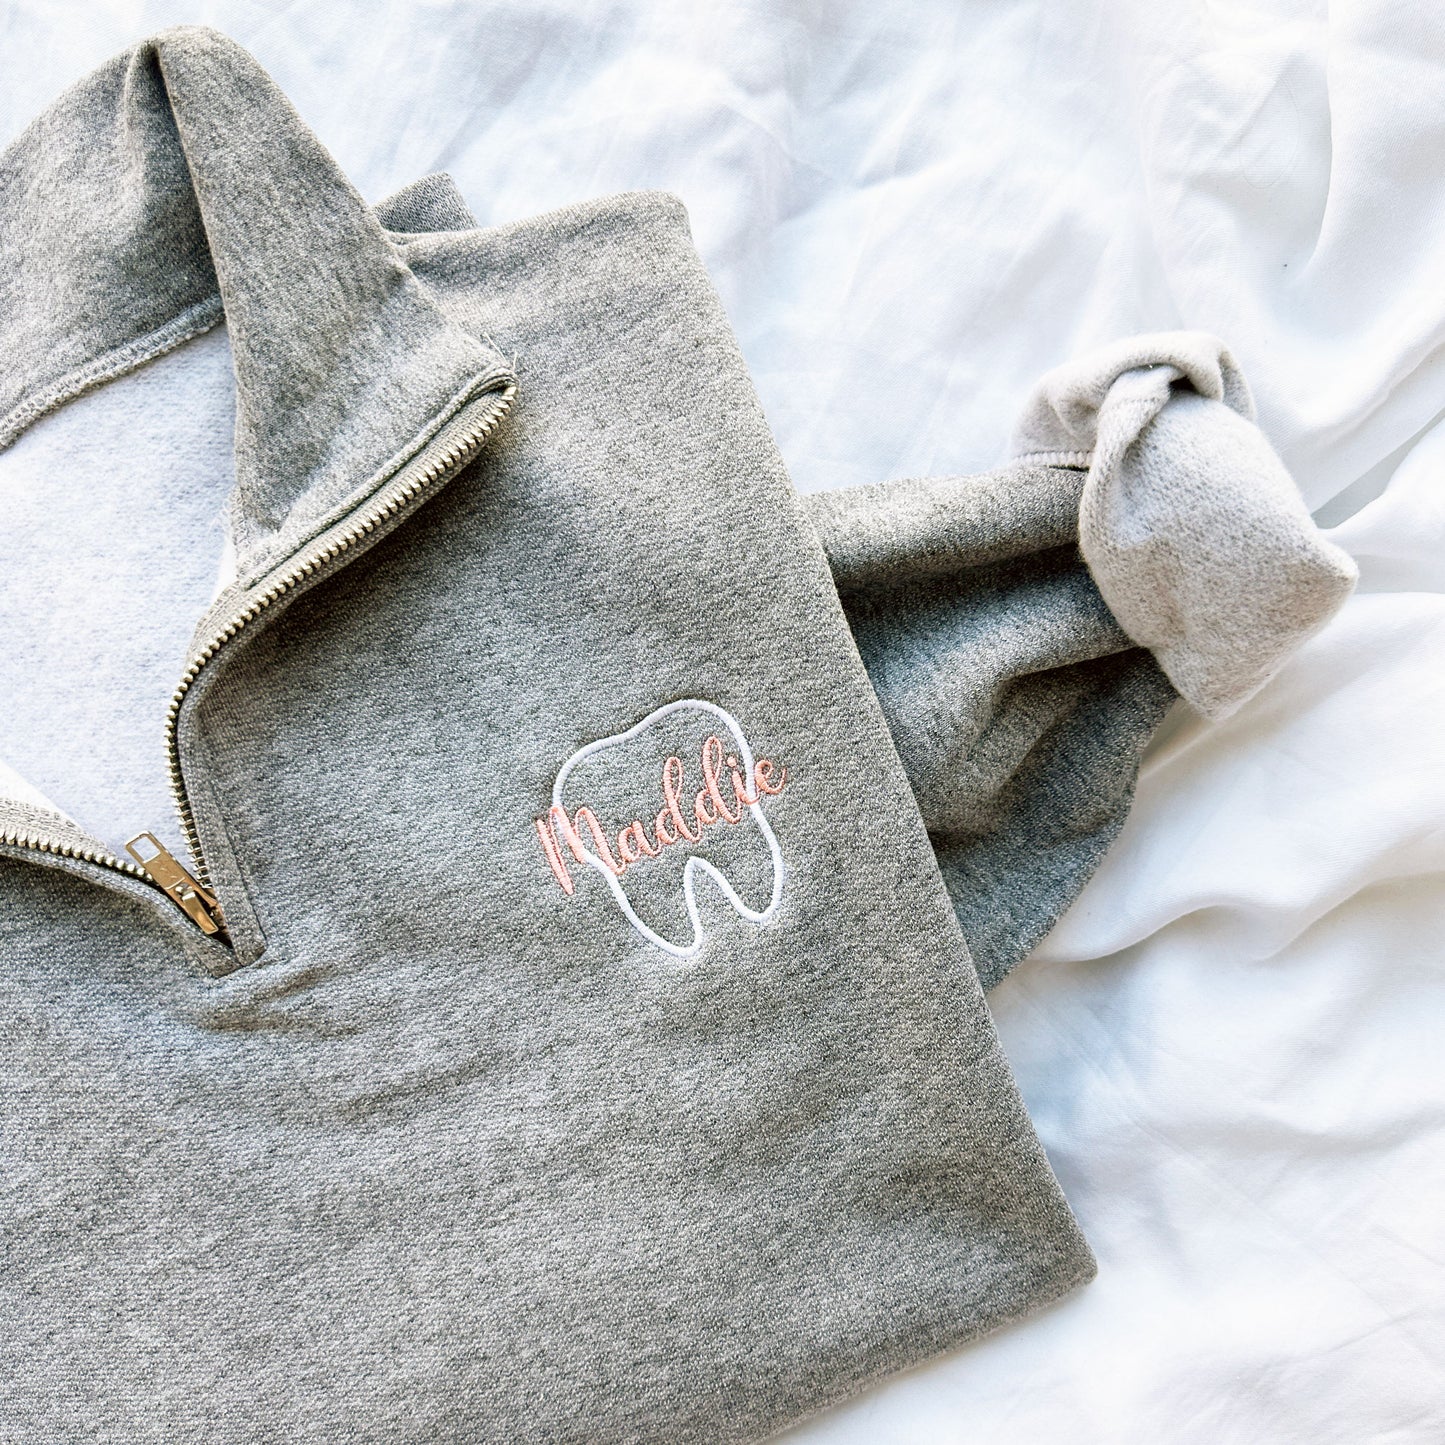 up close of an oxford quarterzip sweatshirt with white outline tooth embroidery and name Maddie in script font and coral pink thread embroidered over the tooth